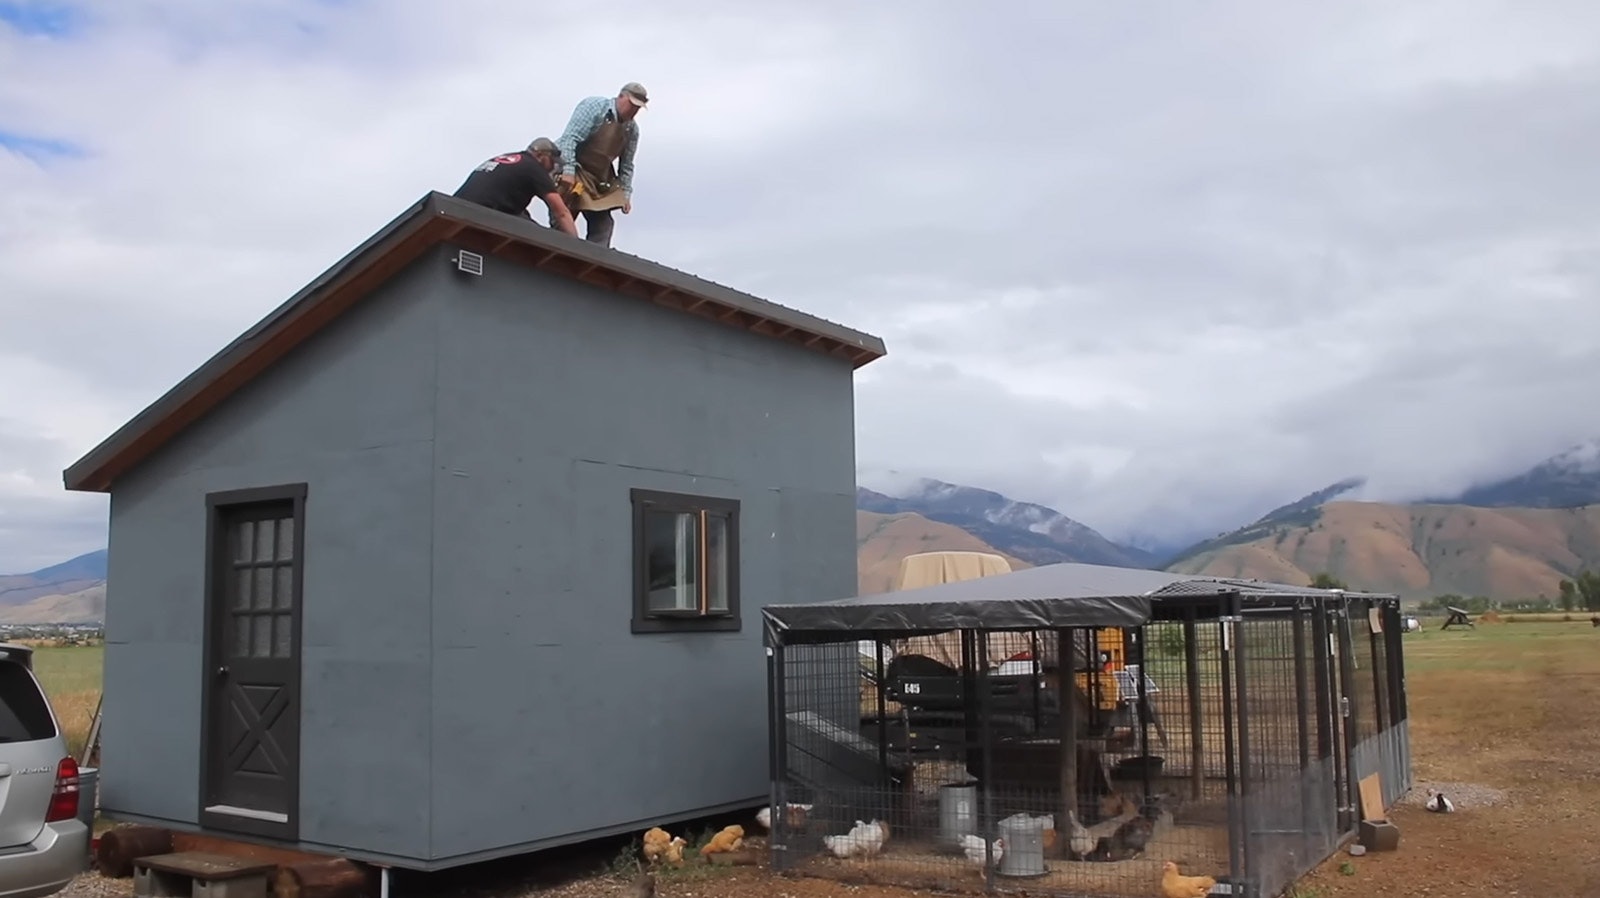 An off-grid homestead, like this one in the norther Wyoming mountains, can include multiple buildings, sheds, a chicken coop and gardens.